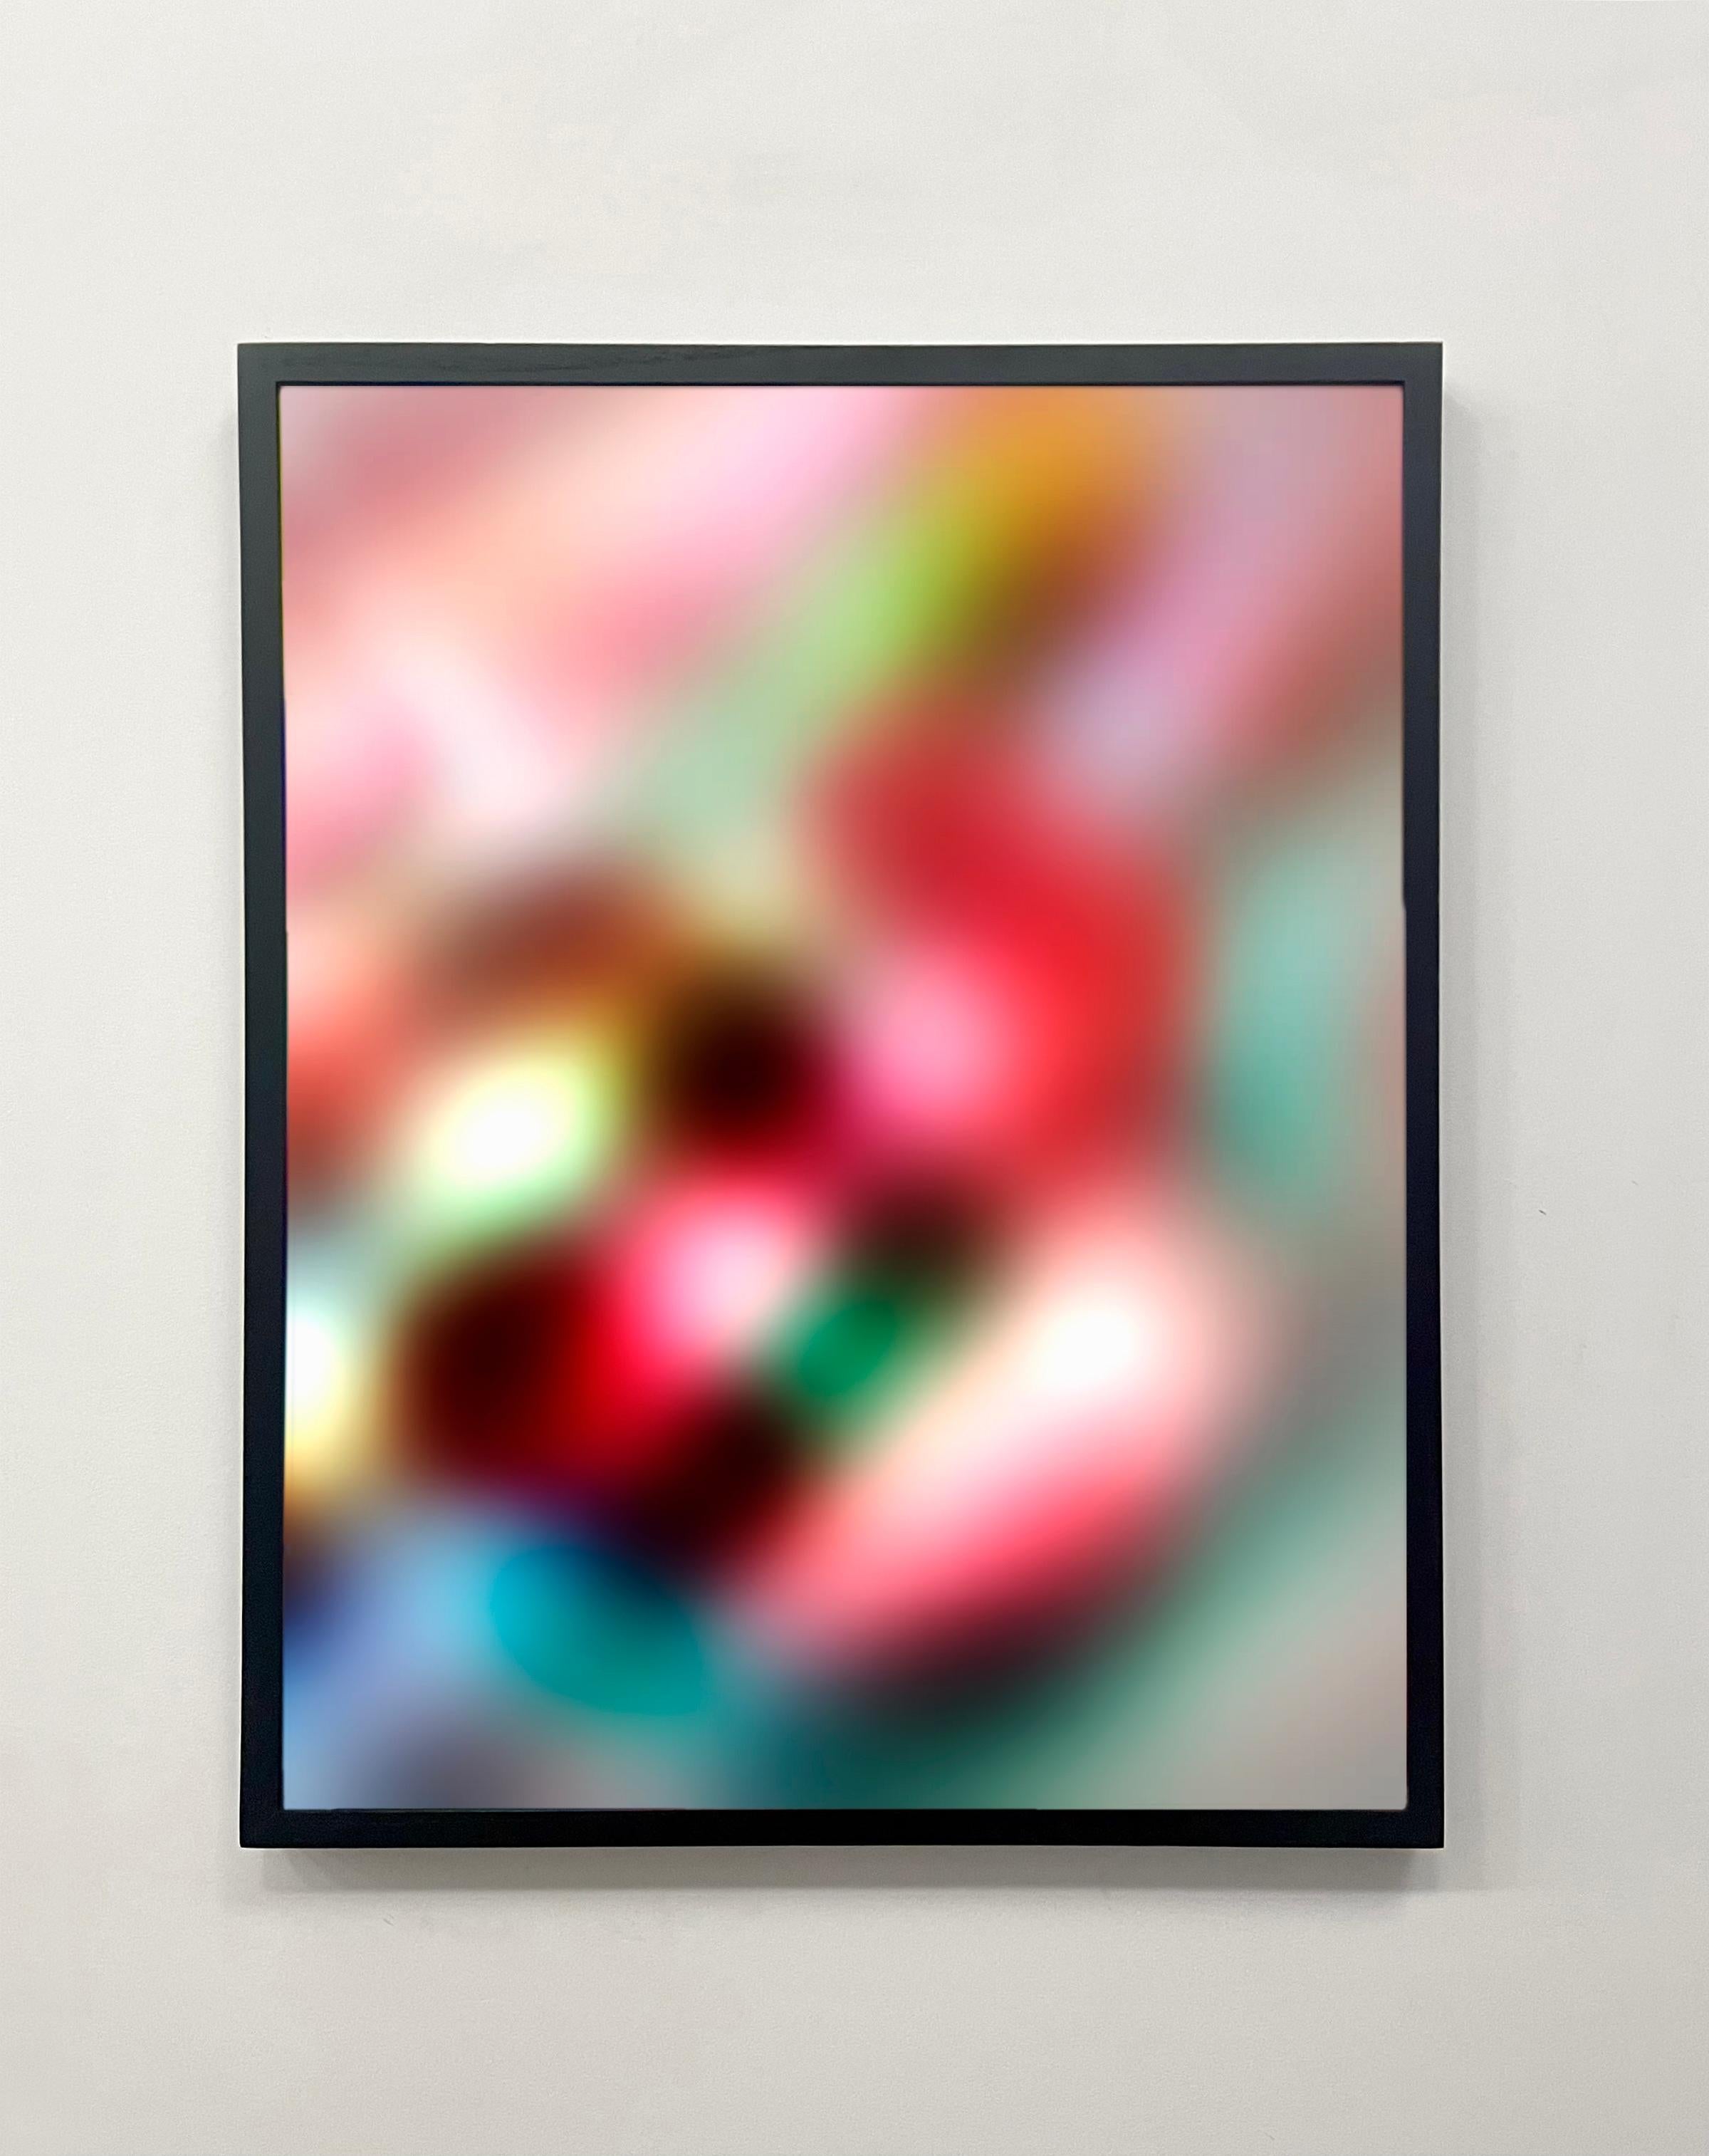 General Information:
Hypertext- Movement #3, 2023
30 x 24 Inch Archival Pigment Print Mounted to Dibond
Black Wooden Frame
Editioned 1/5
Produced on Hahnemühle Fine Art Paper, Mounted to Dibond, and displayed borderless in a black, wooden